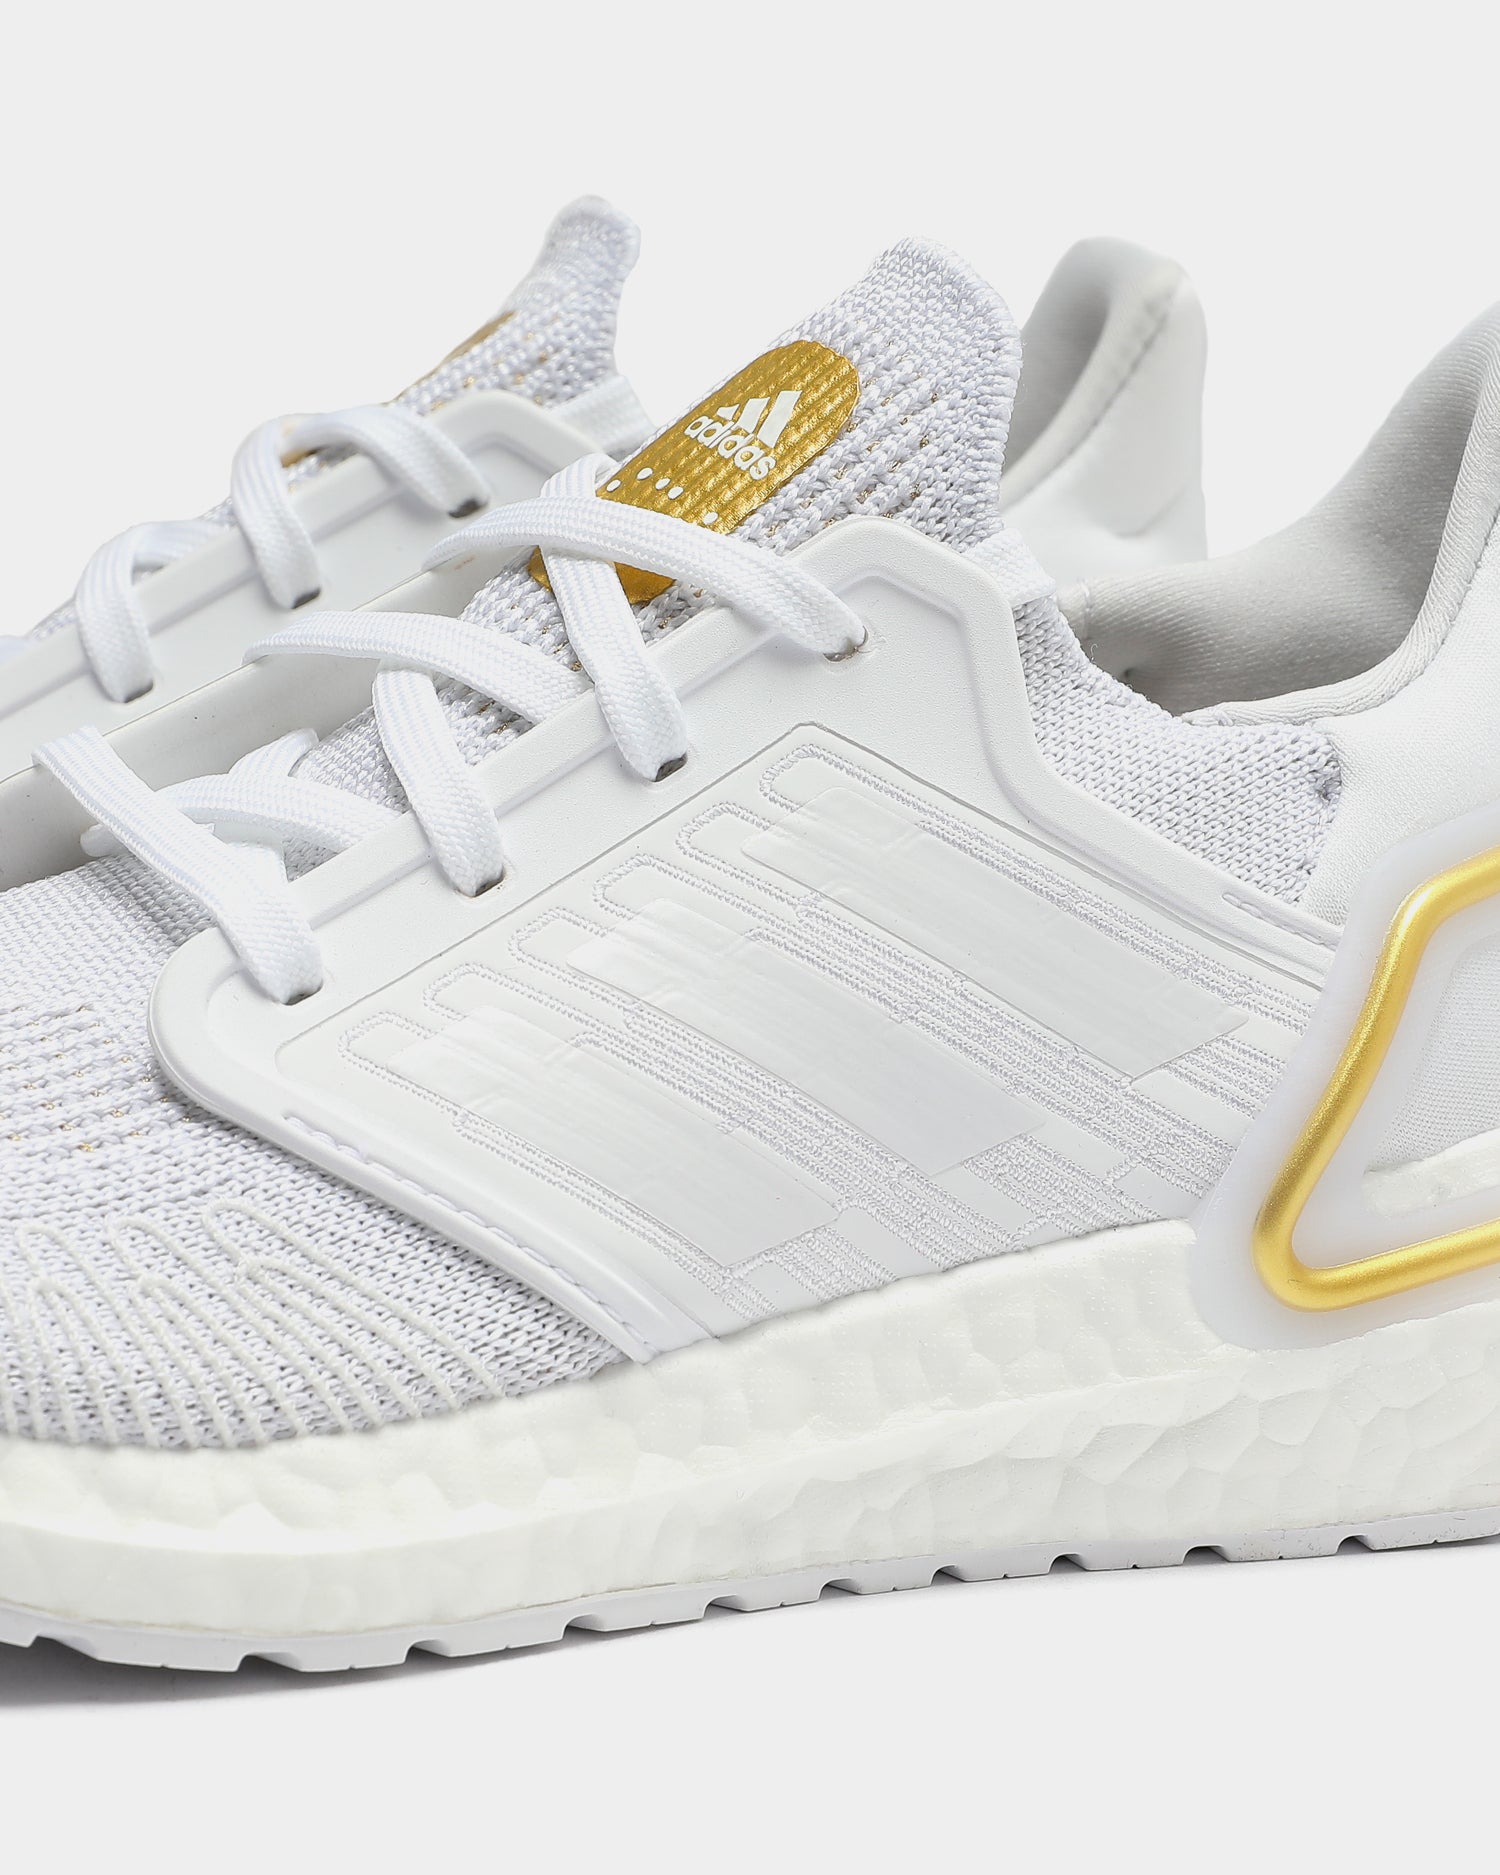 women's white and gold adidas